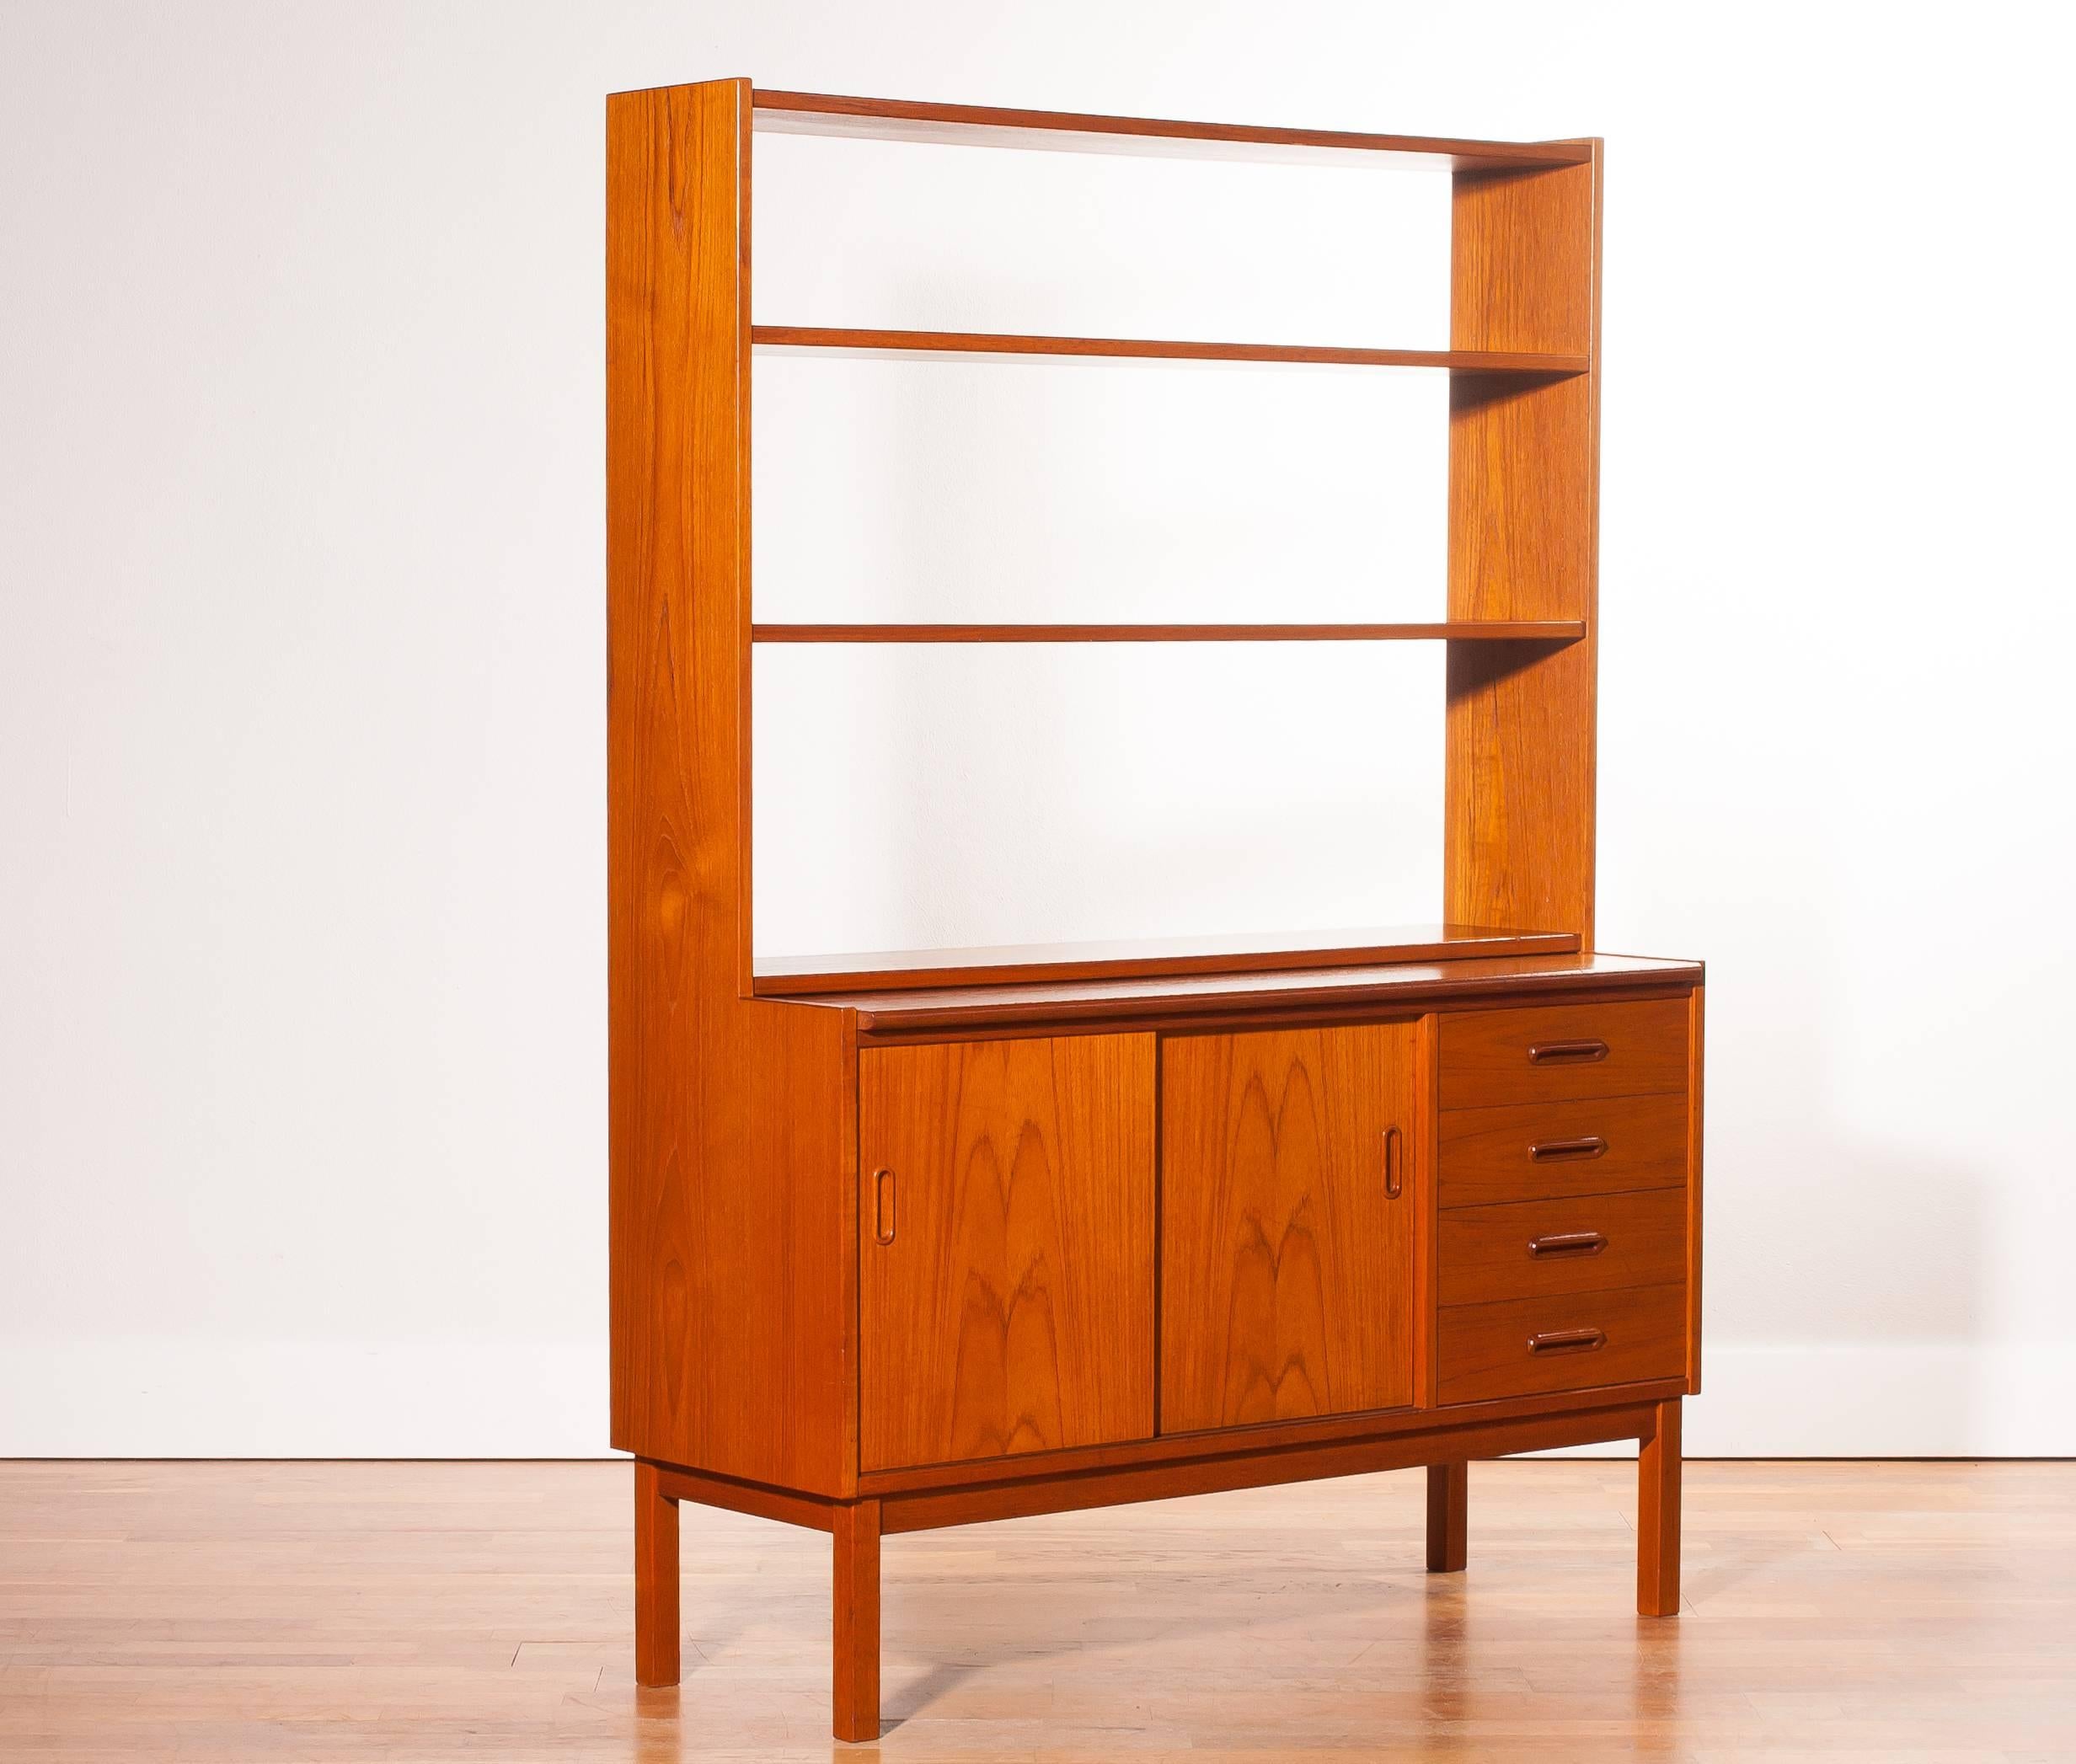 1960s, Teak Book Case with Slidable Writing / Working Space from Sweden 1